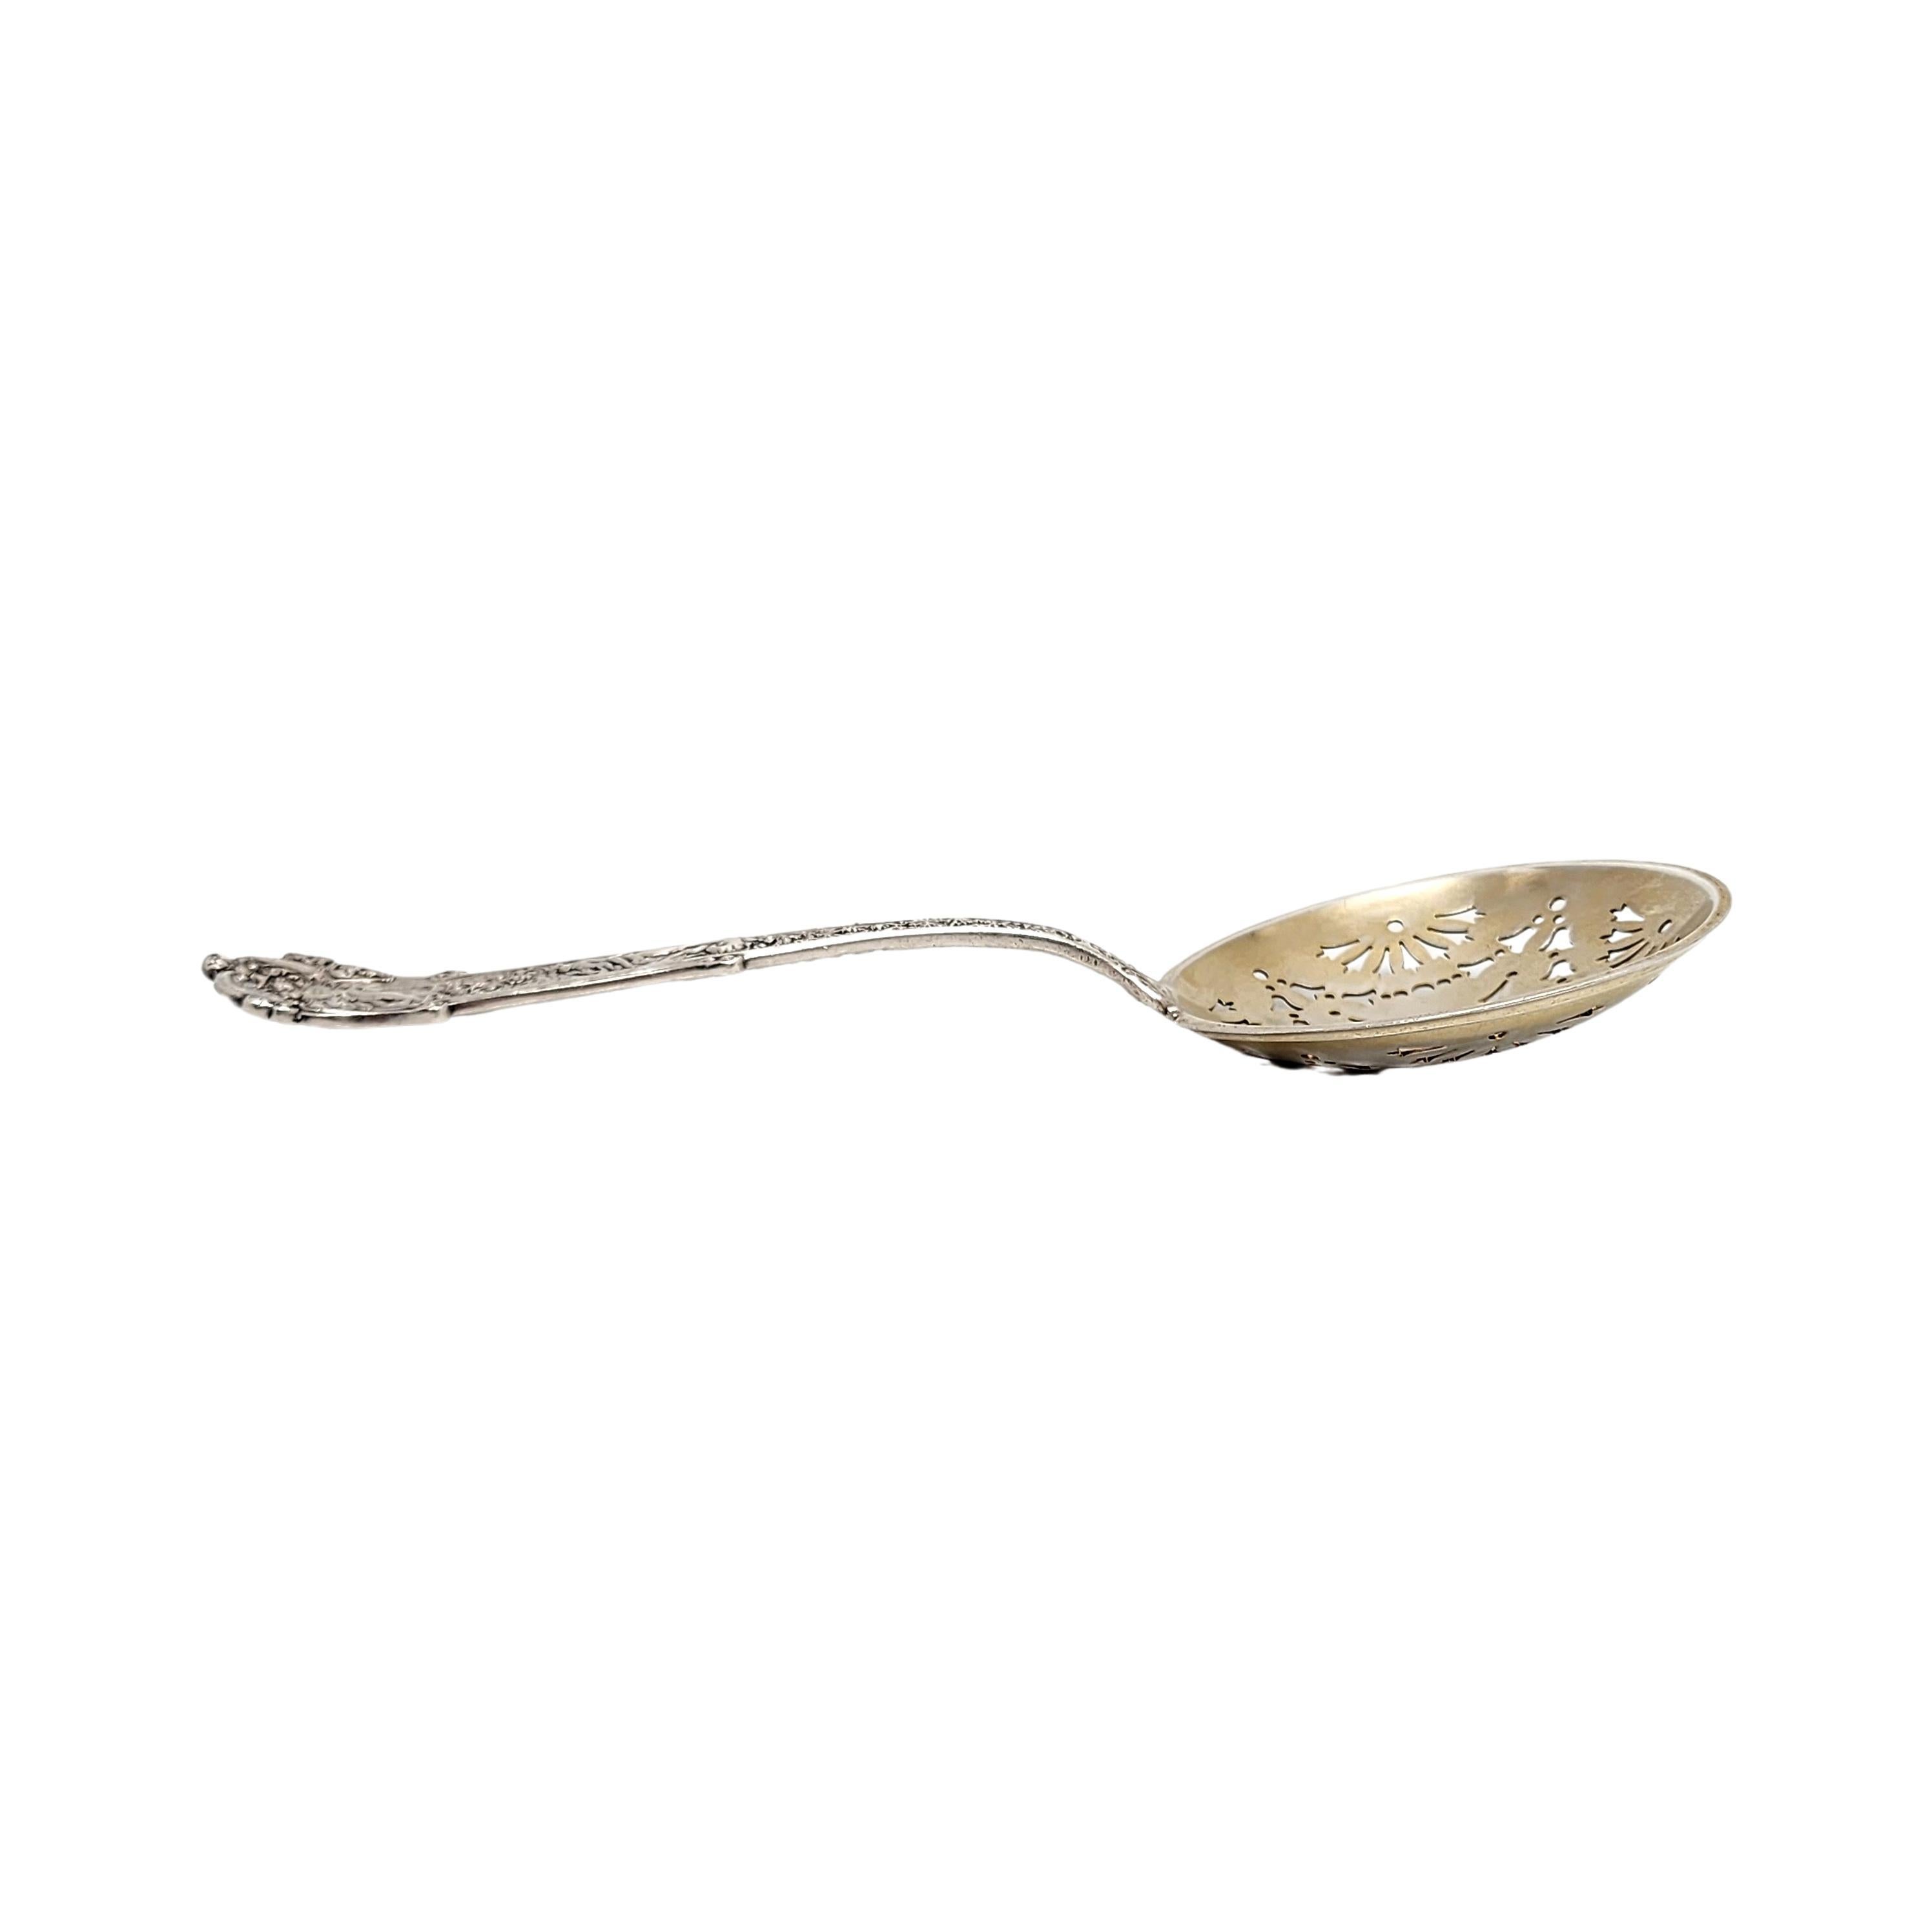 Gorham Coligni Sterling Silver Gold Wash Bowl Pea Serving Spoon w/Mono #15661 In Good Condition For Sale In Washington Depot, CT